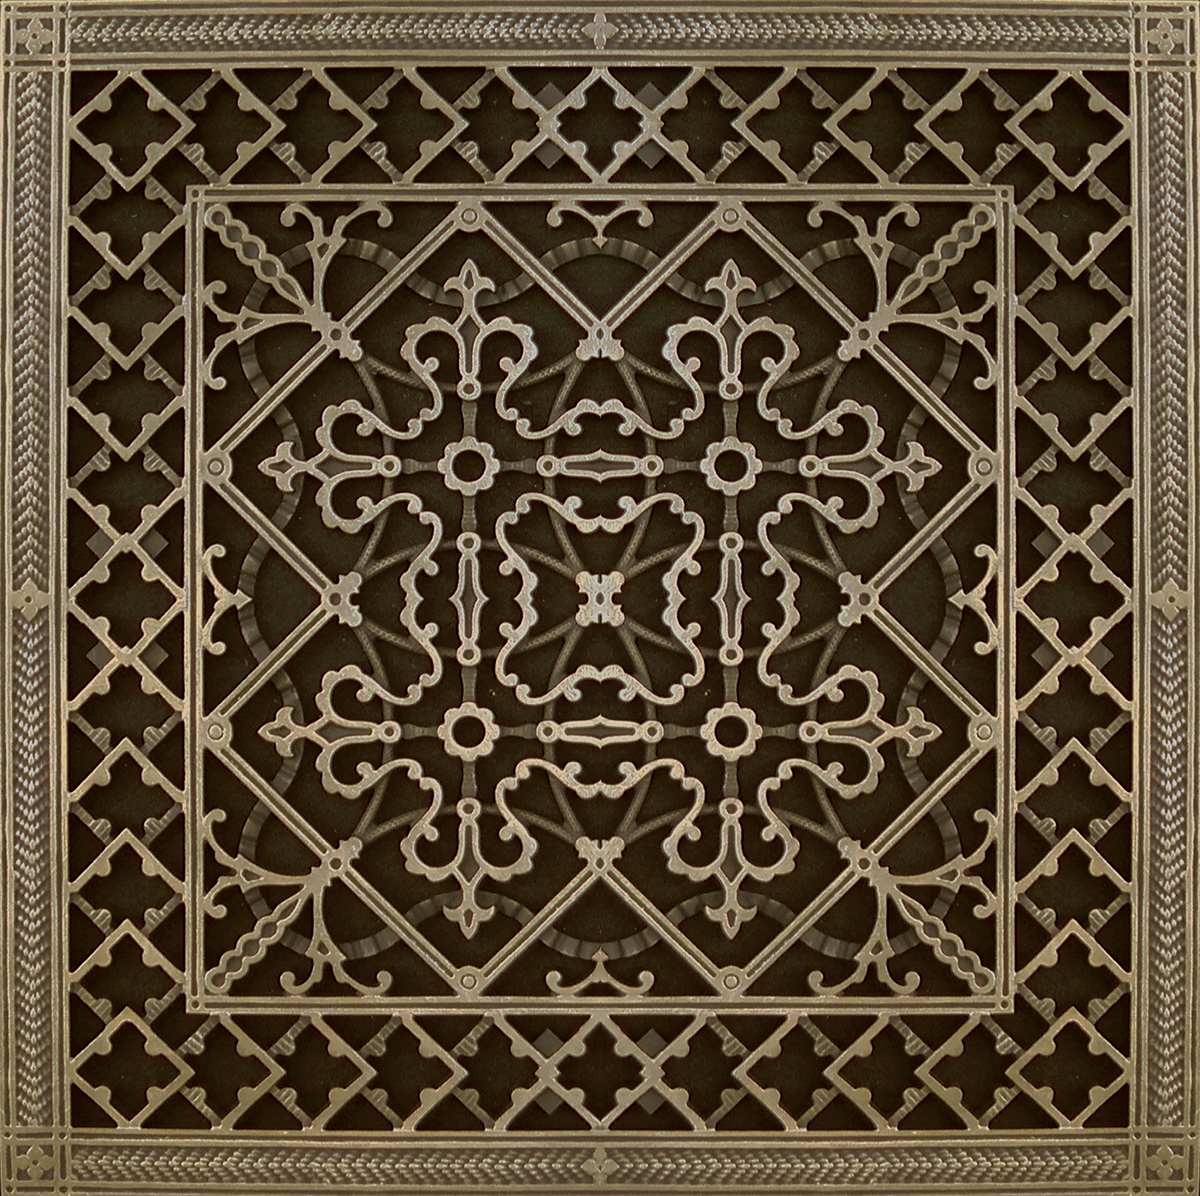 Decorative grille Craftsman style Arts and Crafts 24" x 24" in Antique Brass Finish.